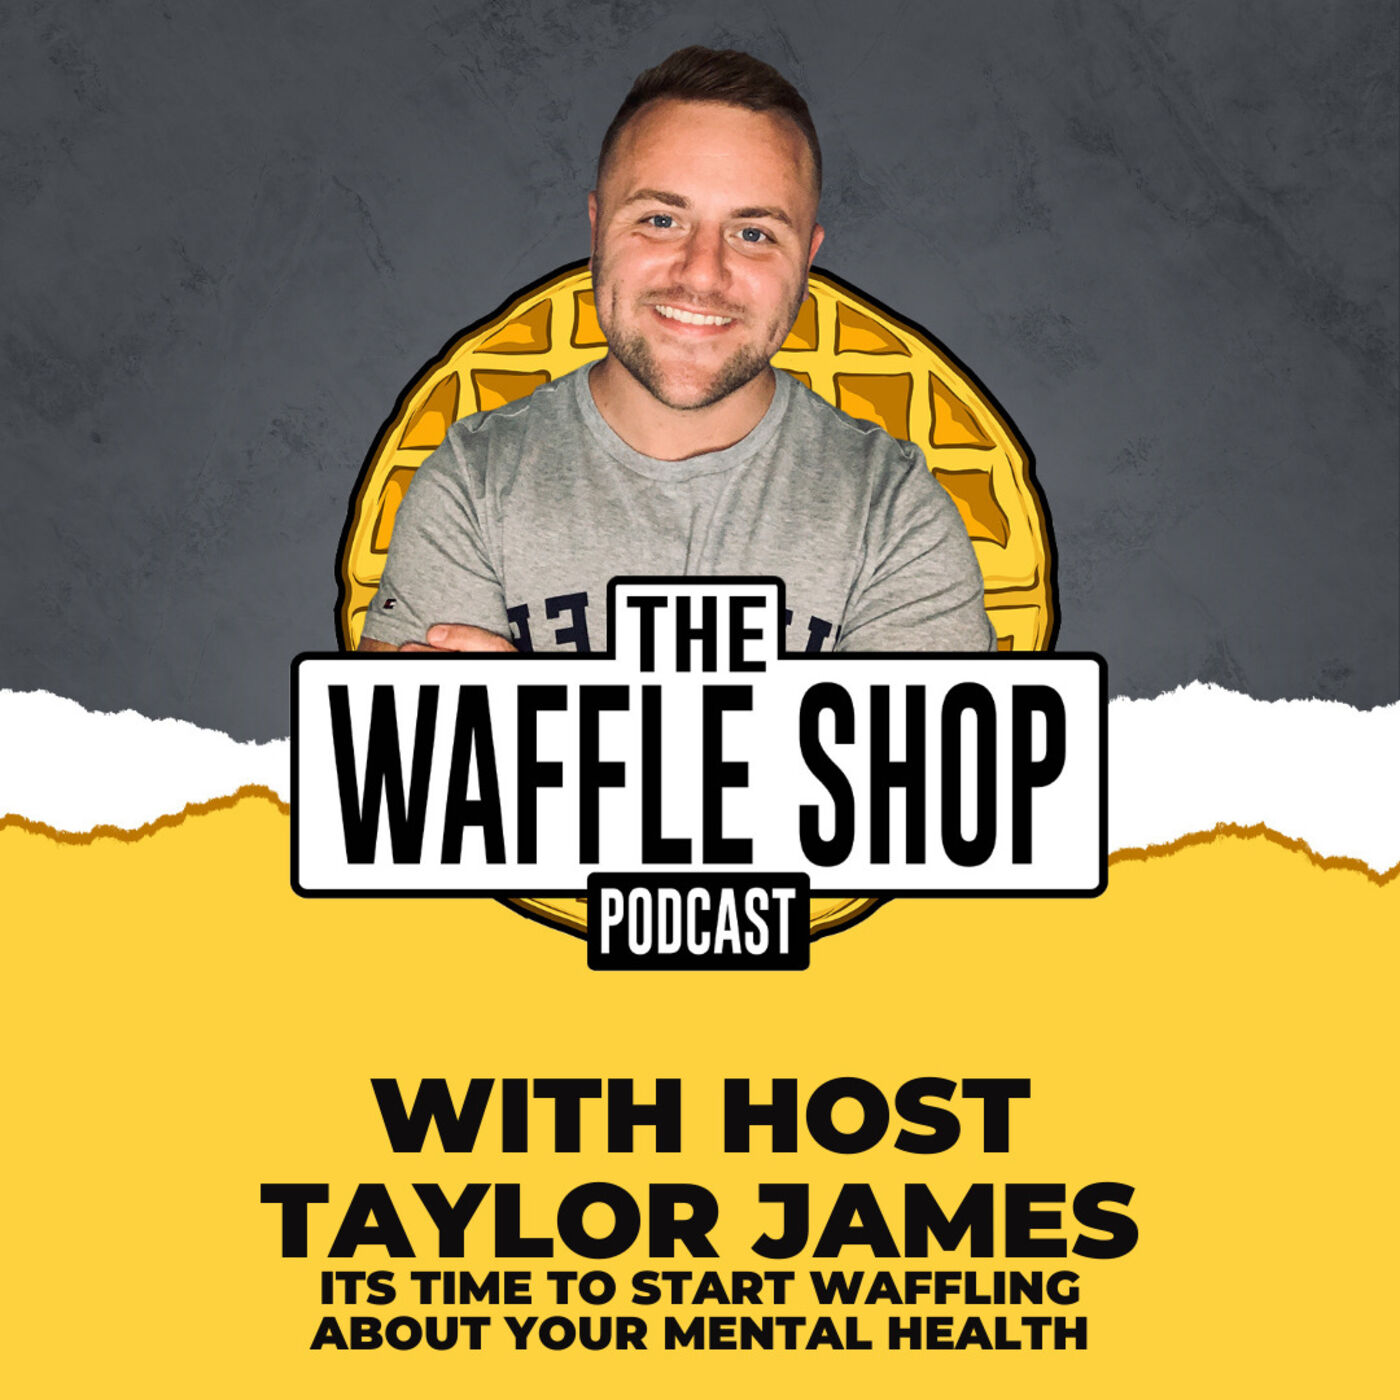 Interview w/ Taylor James of the Waffle Shop Podcast